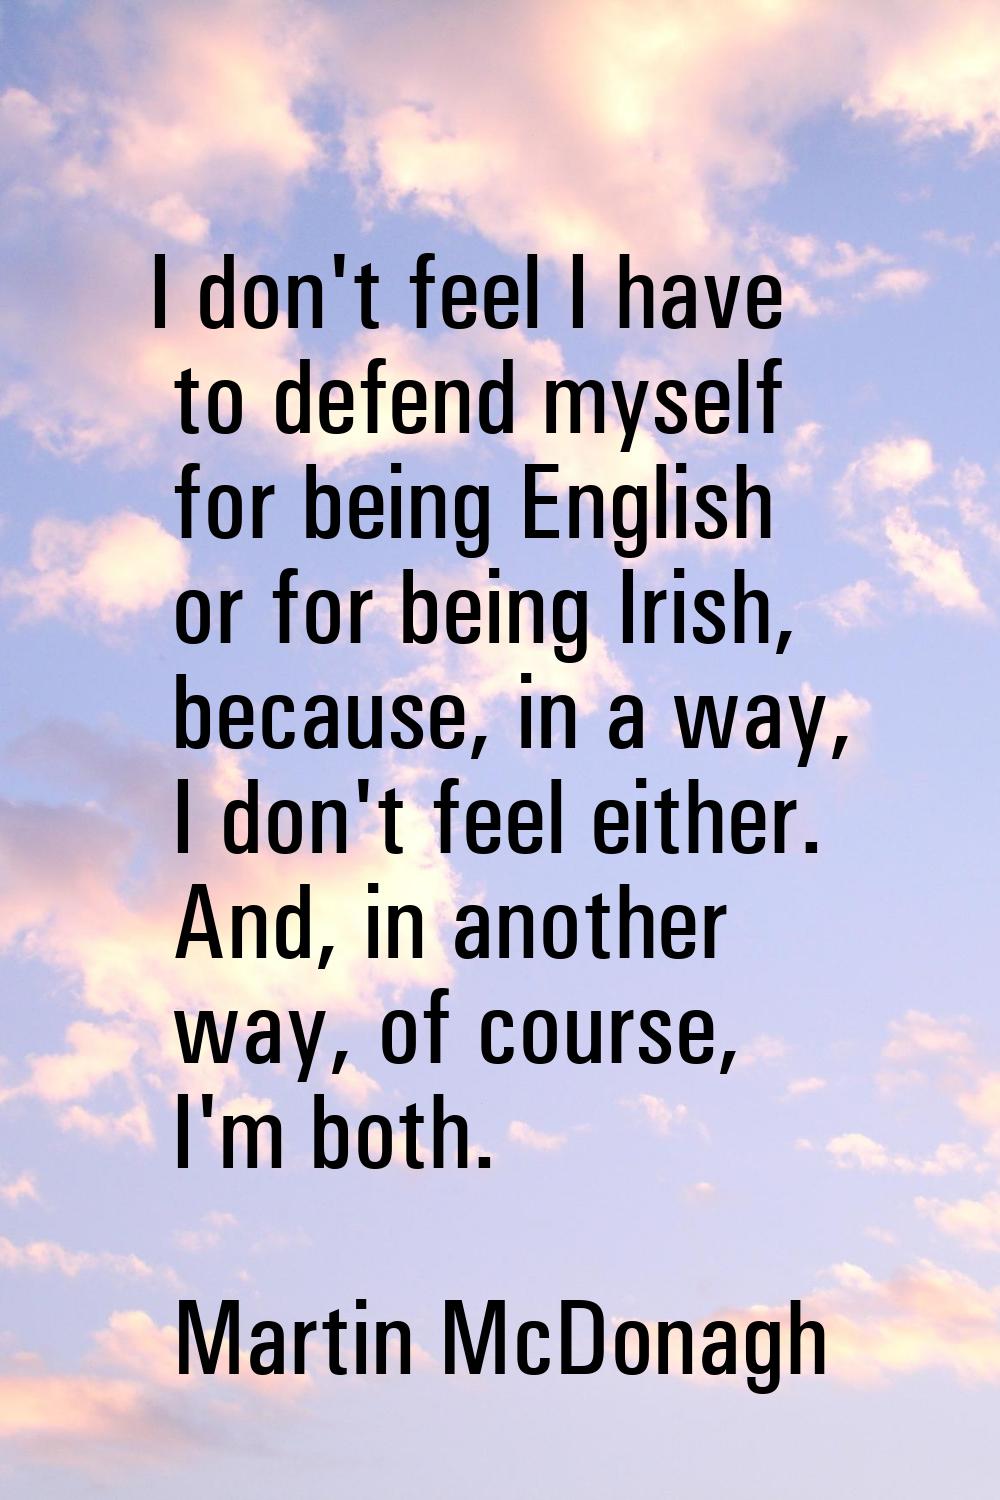 I don't feel I have to defend myself for being English or for being Irish, because, in a way, I don